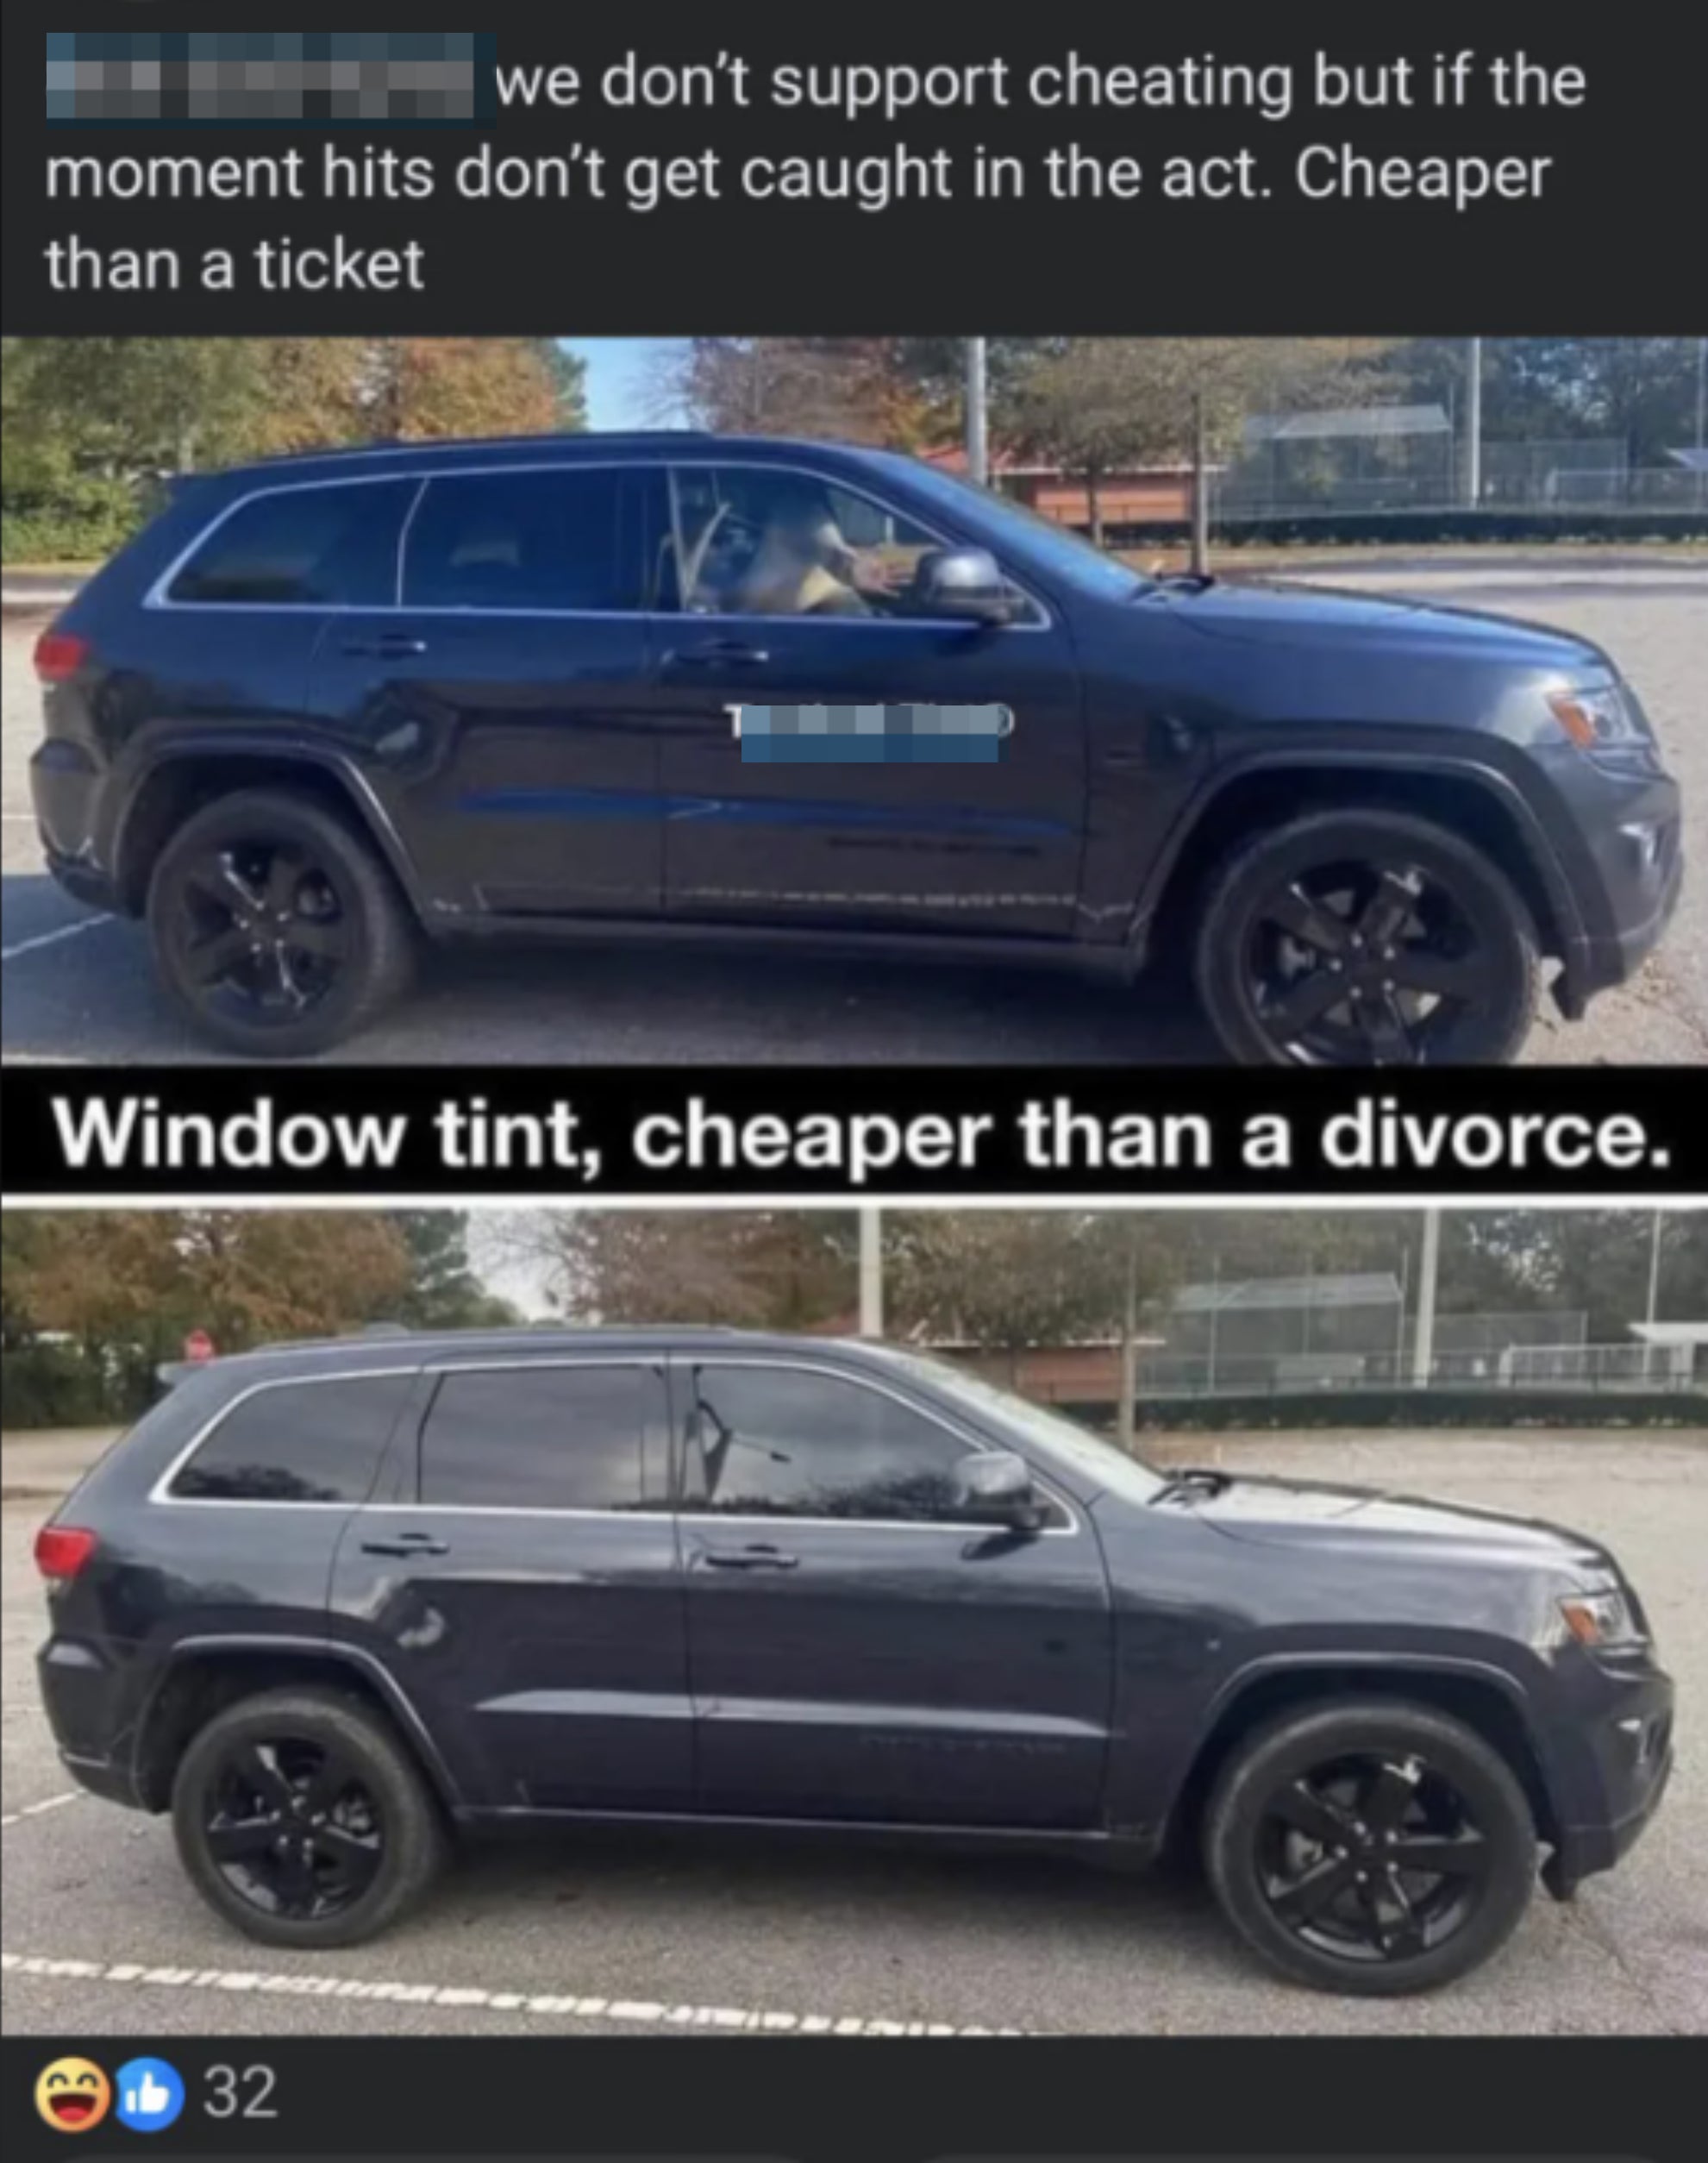 Advertisement showcasing a car with tinted windows, alongside a slogan about window tinting being cheaper than a divorce